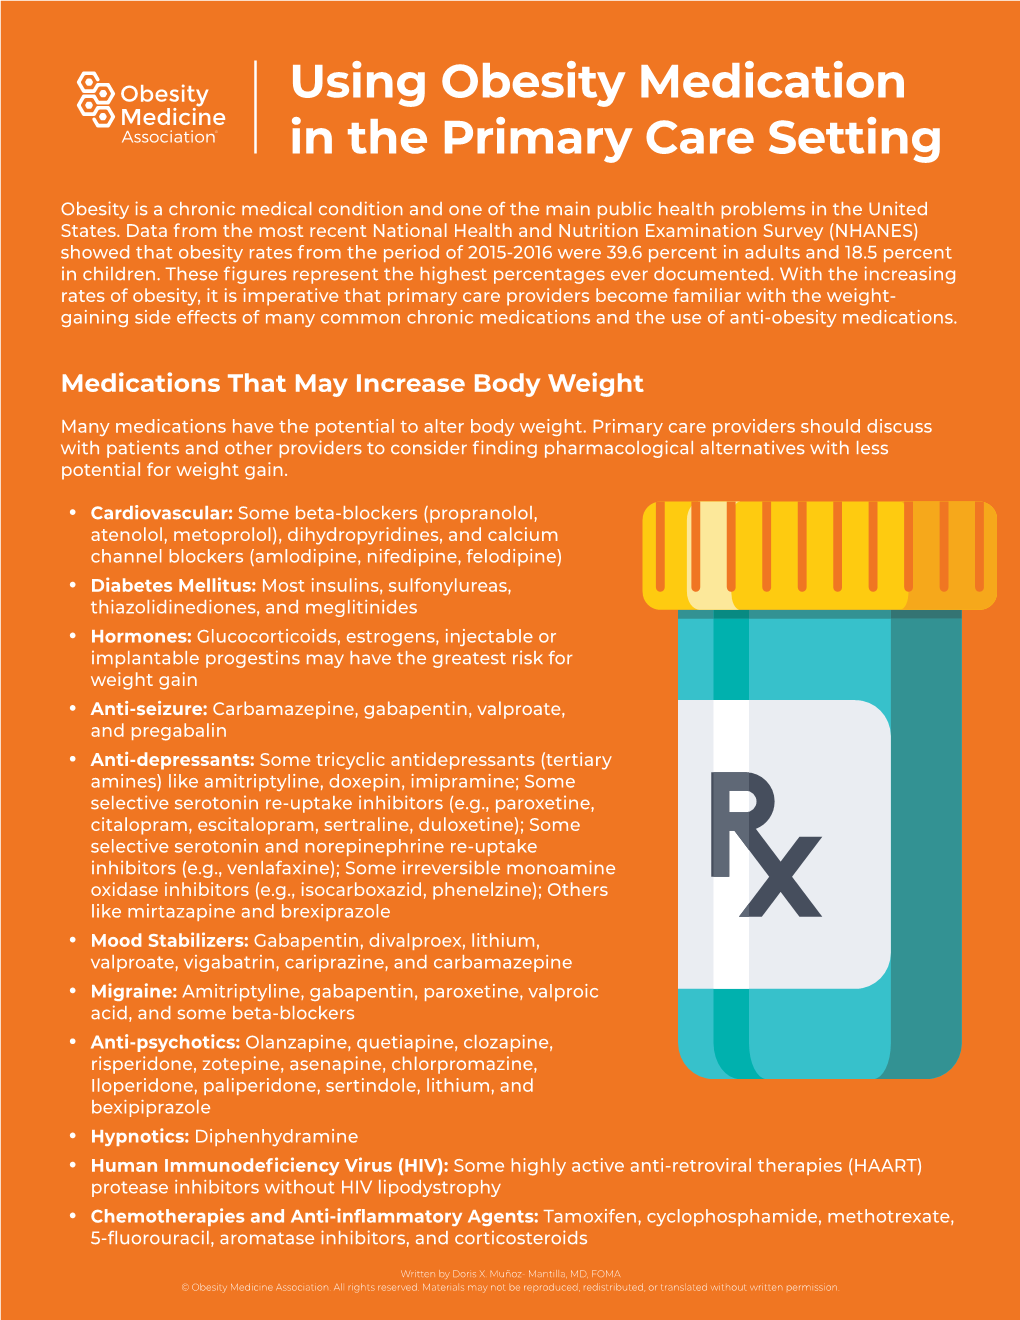 Using Obesity Medication in the Primary Care Setting